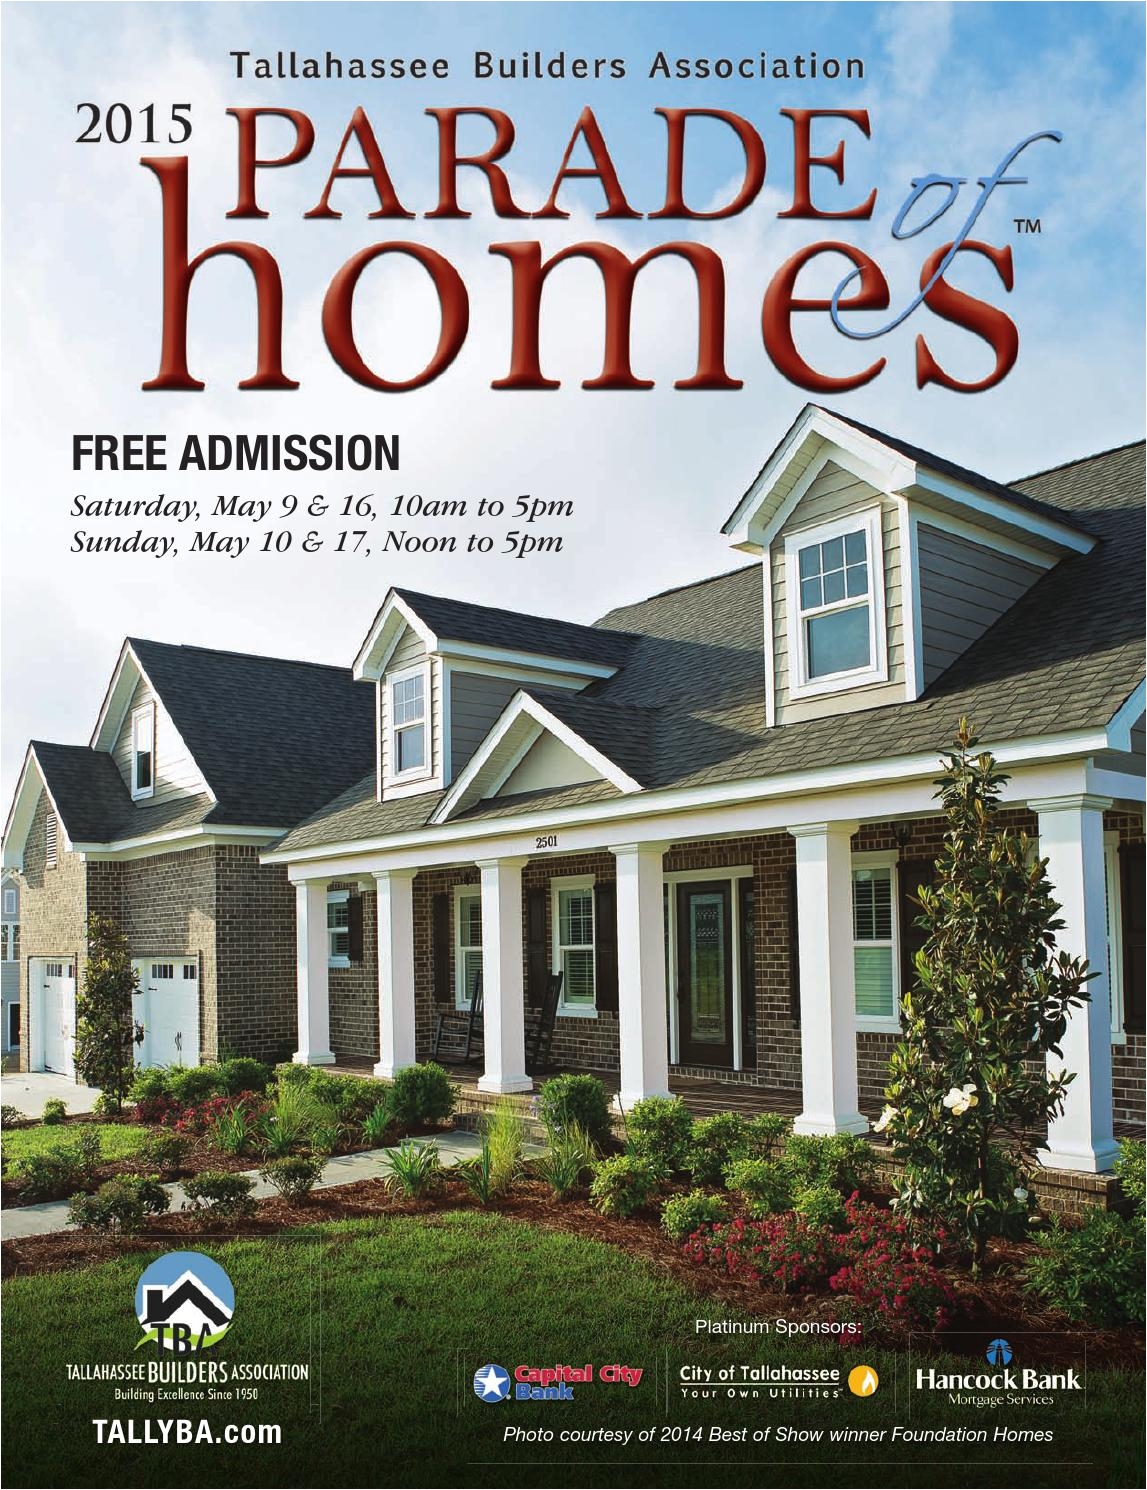 2015 tallahassee parade of homes by tba tallahassee builders association issuu